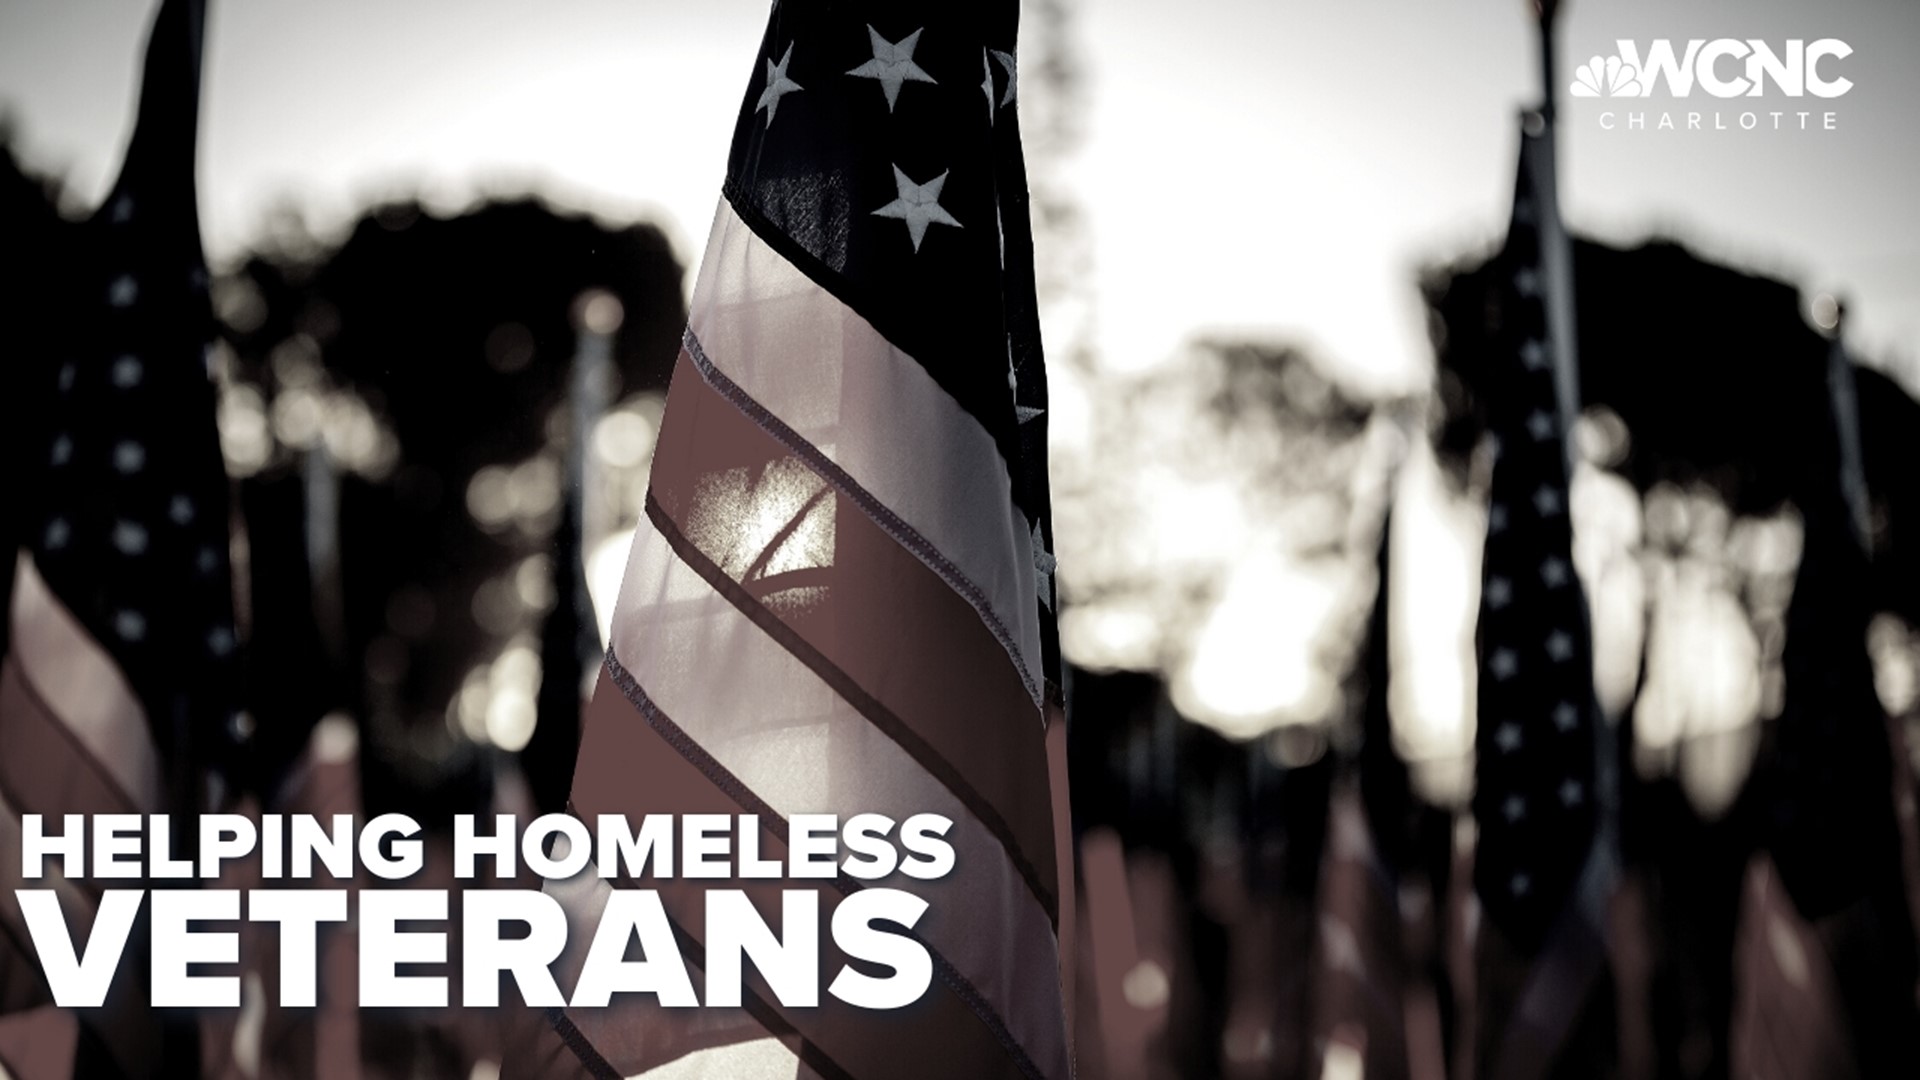 The pandemic, a housing crisis and on-going economic uncertainty are leaving veterans experiencing homelessness or on the verge of it.